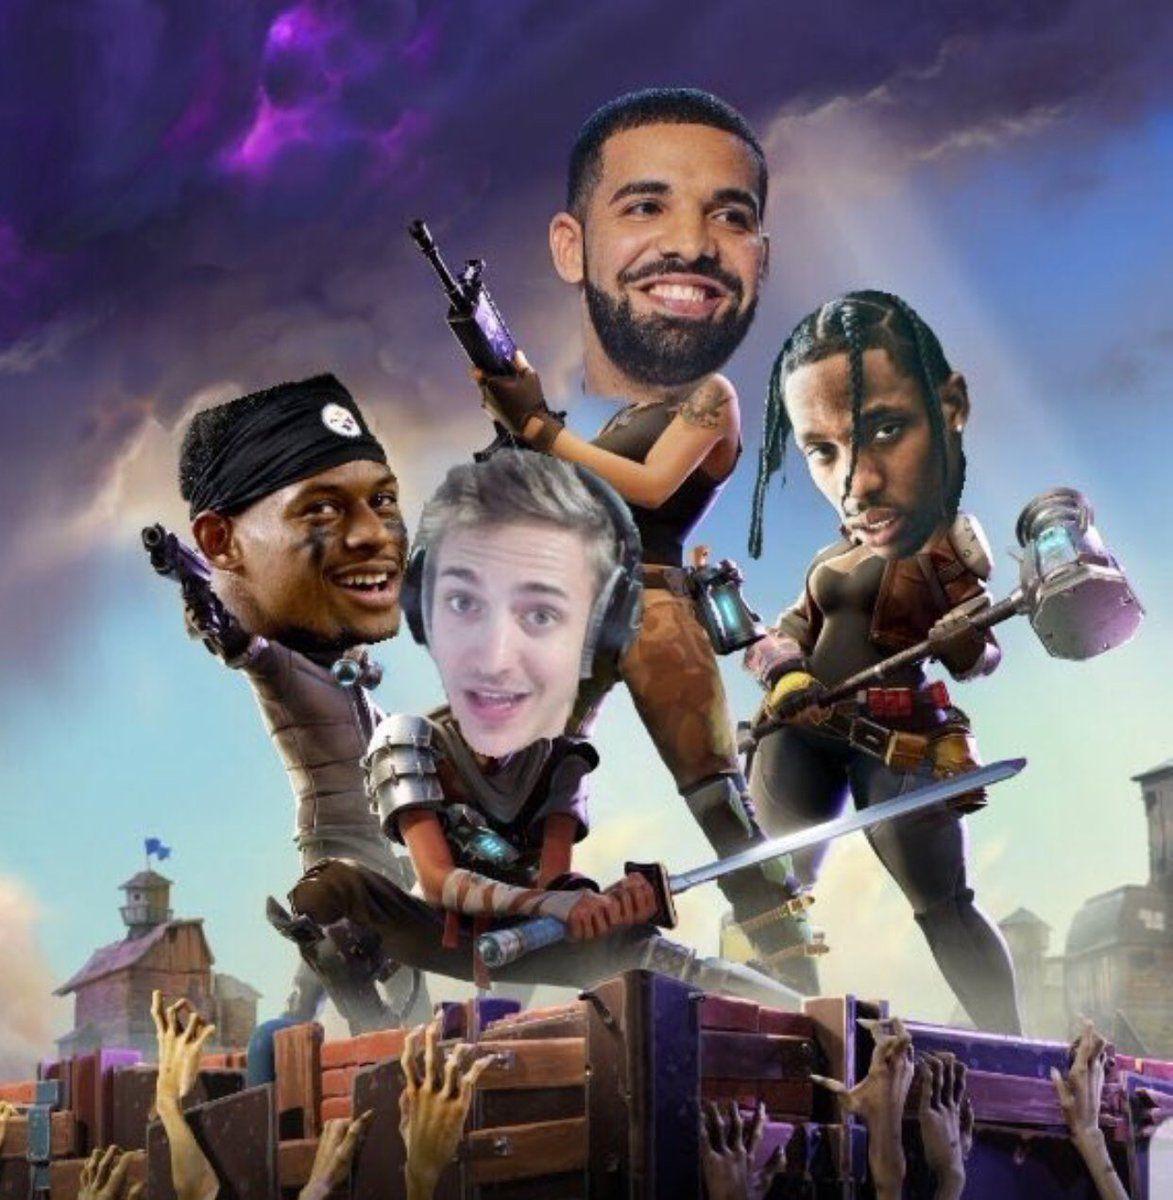 Drake played Fortnite with streamer Ninja and it was